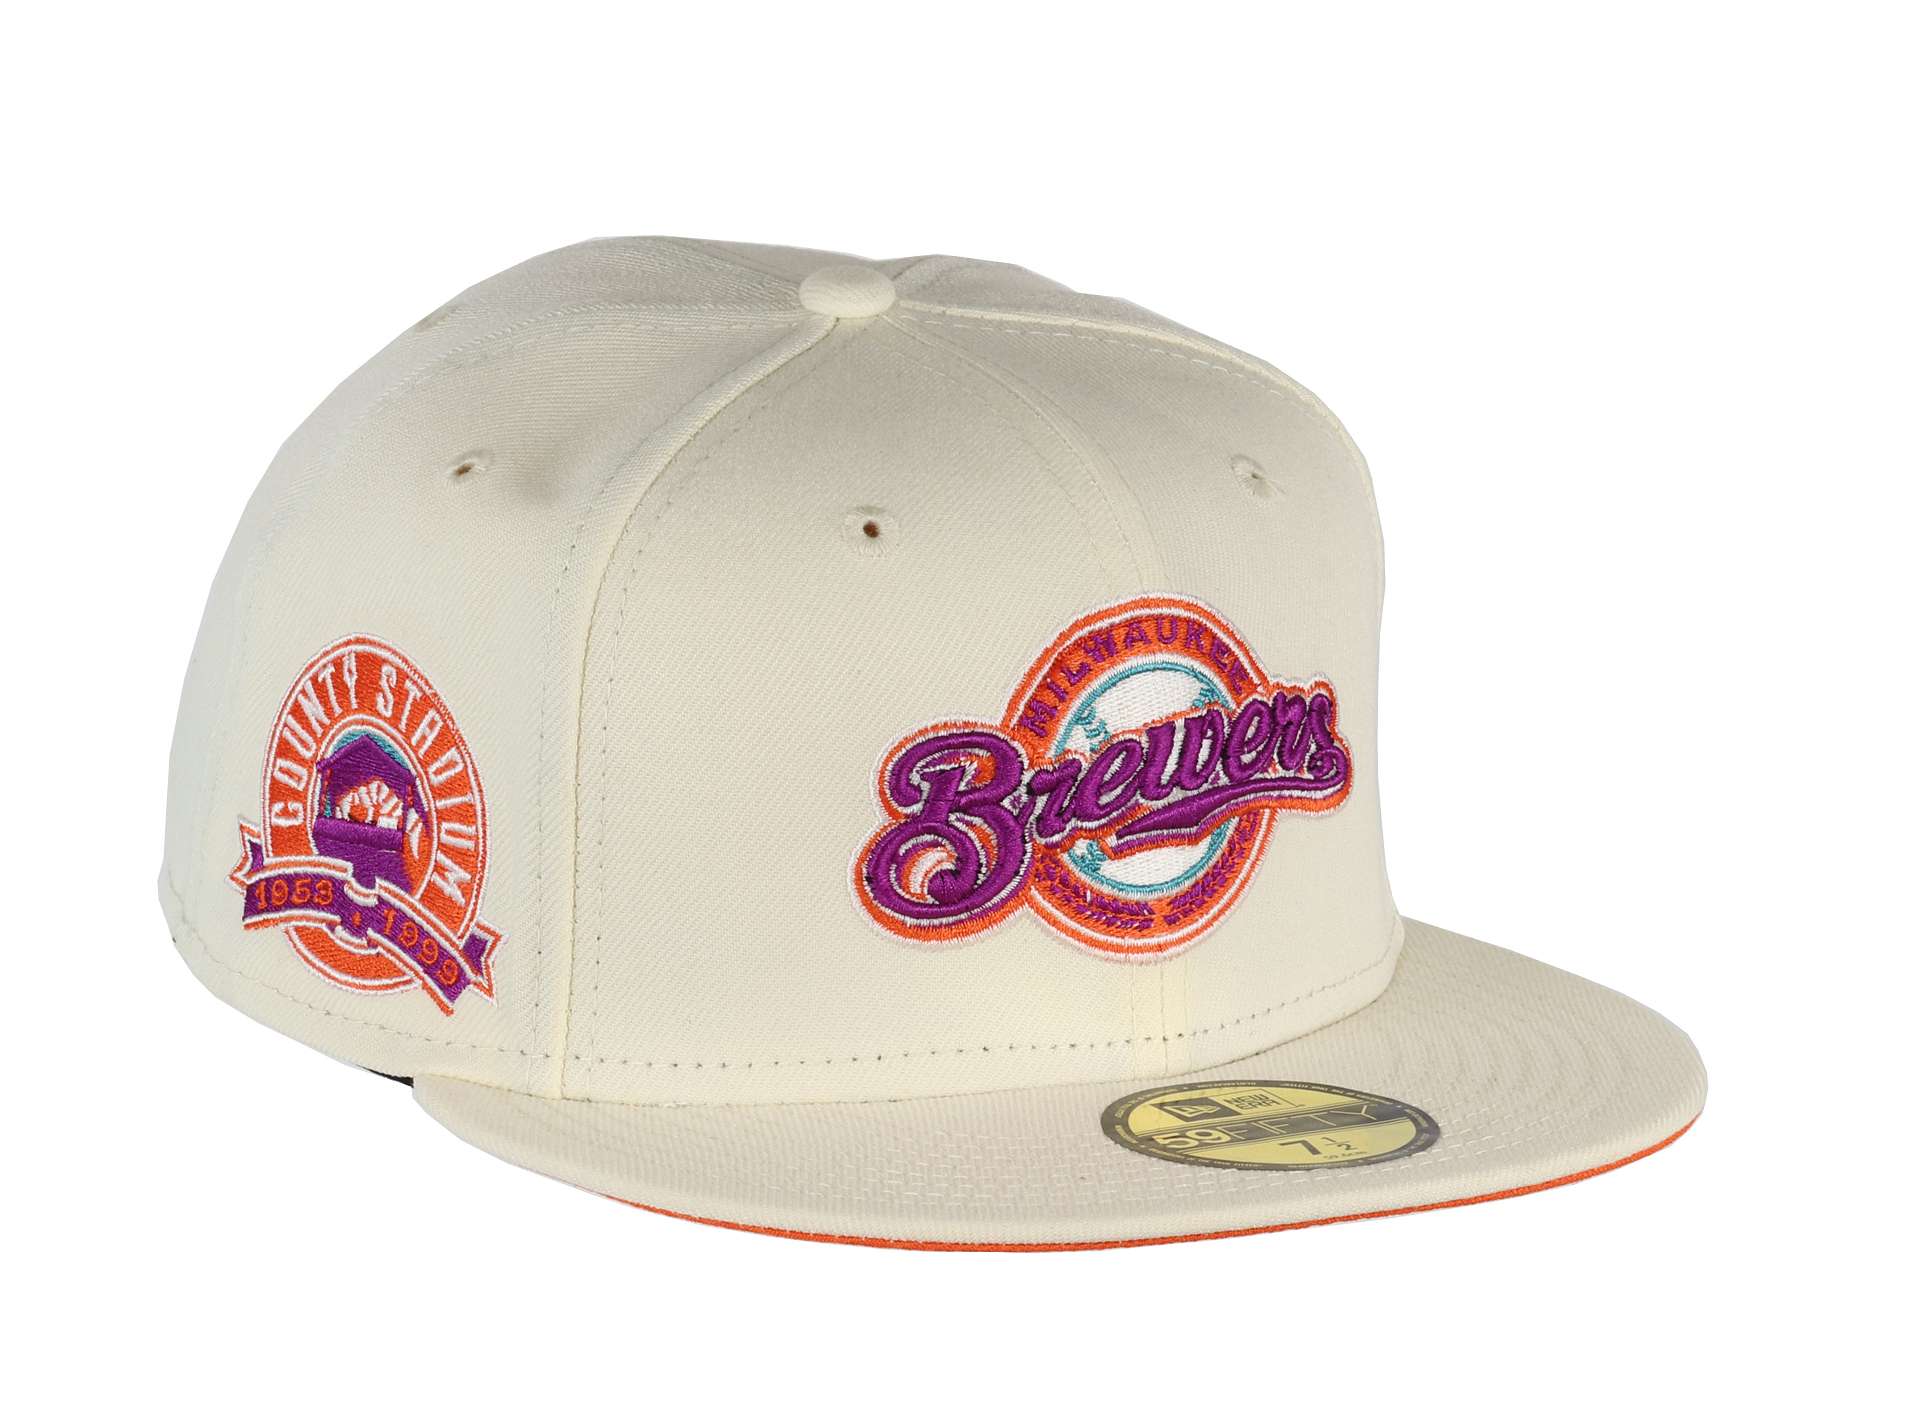 Milwaukee Brewers MLB Cooperstown County Stadium Sidepatch Chrome 59Fifty Basecap New Era